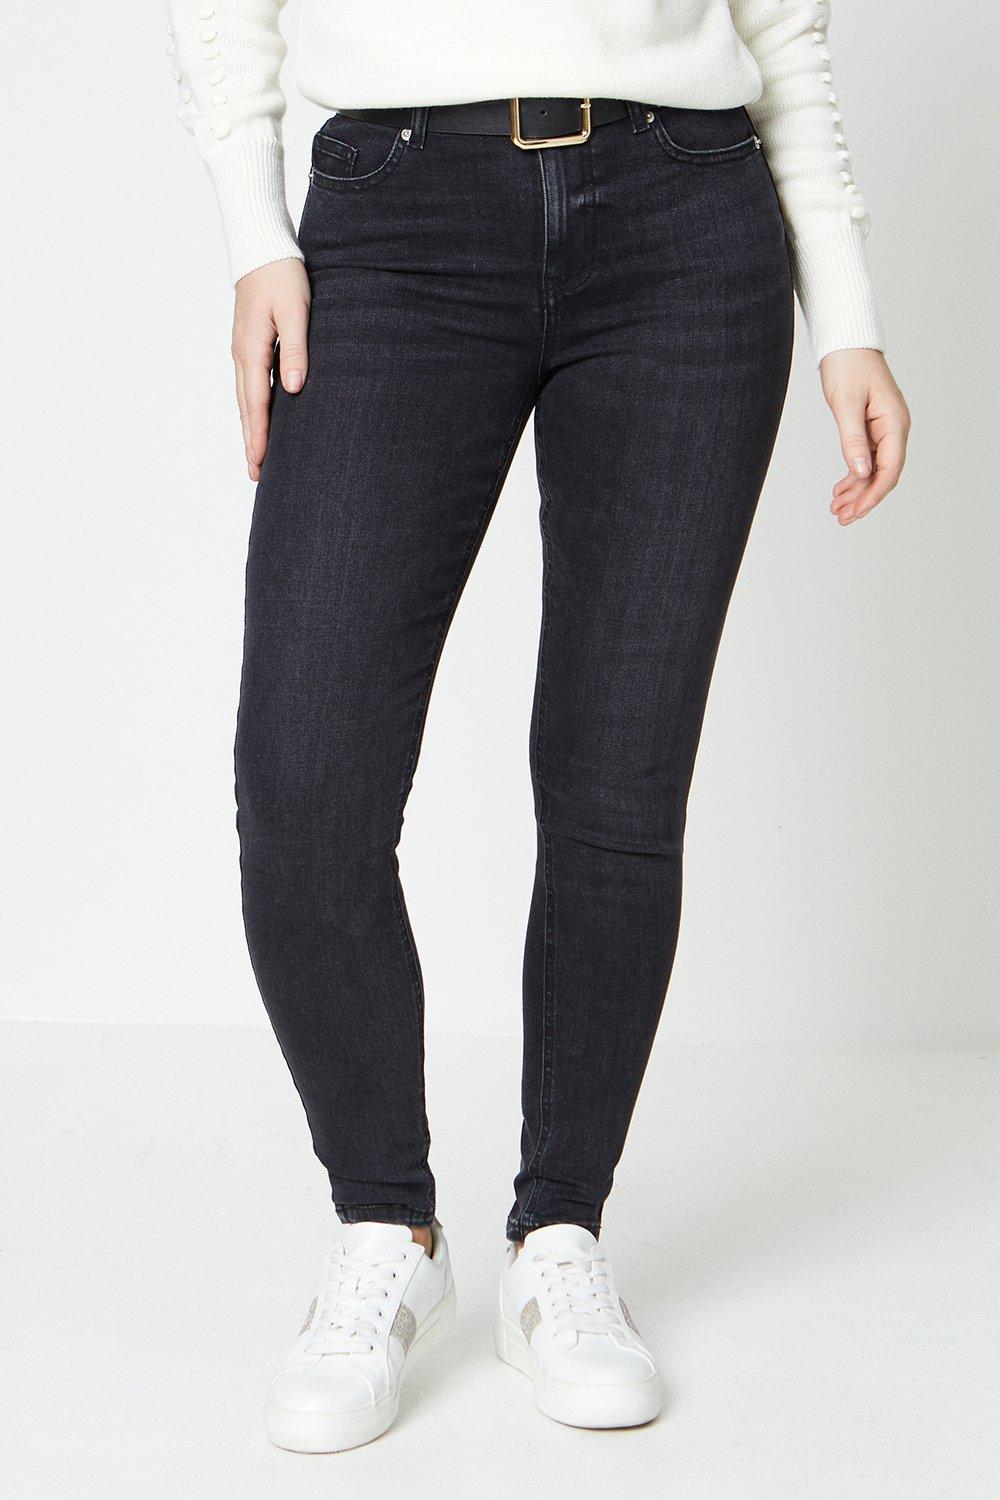 Women’s High Rise Skinny Jeans - washed black - 16